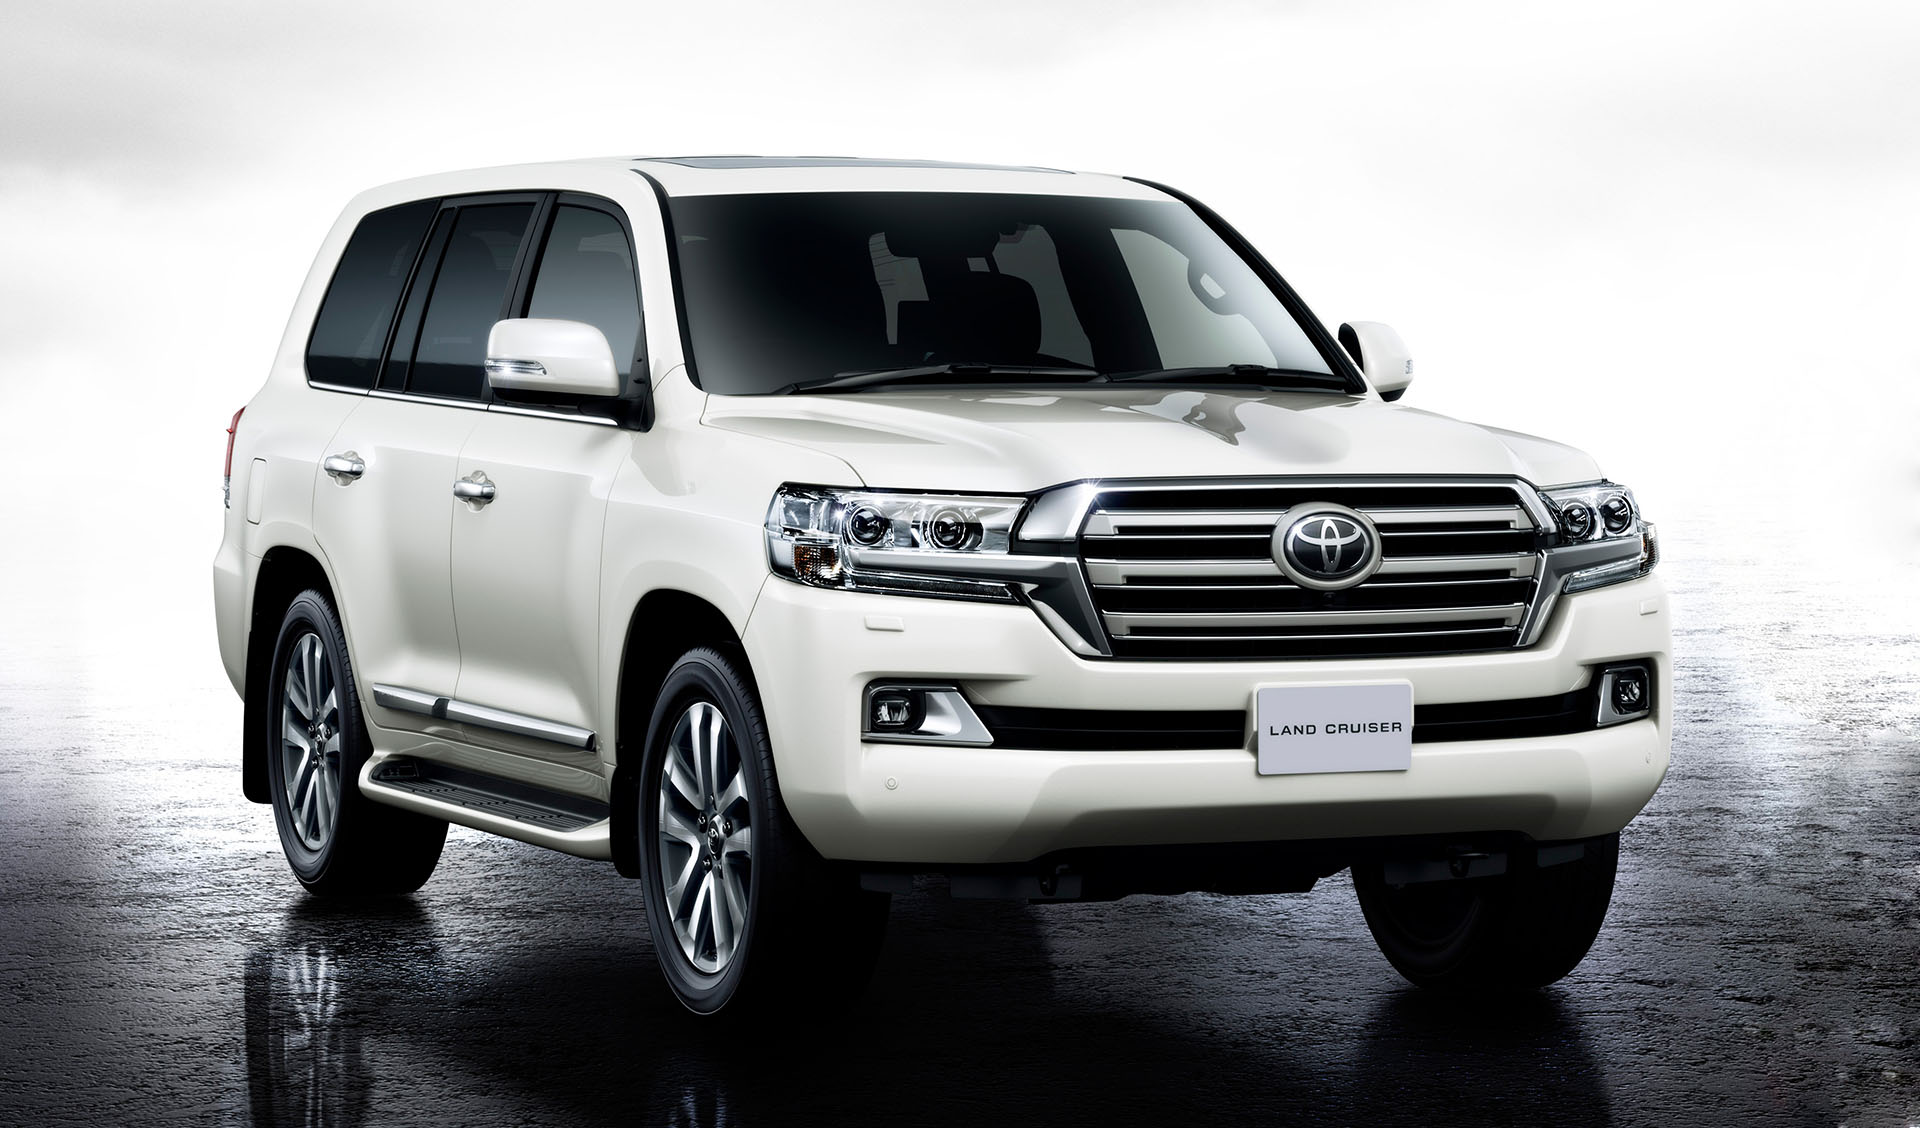 2016 Toyota Land Cruiser 200 (facelift) launched in Japan